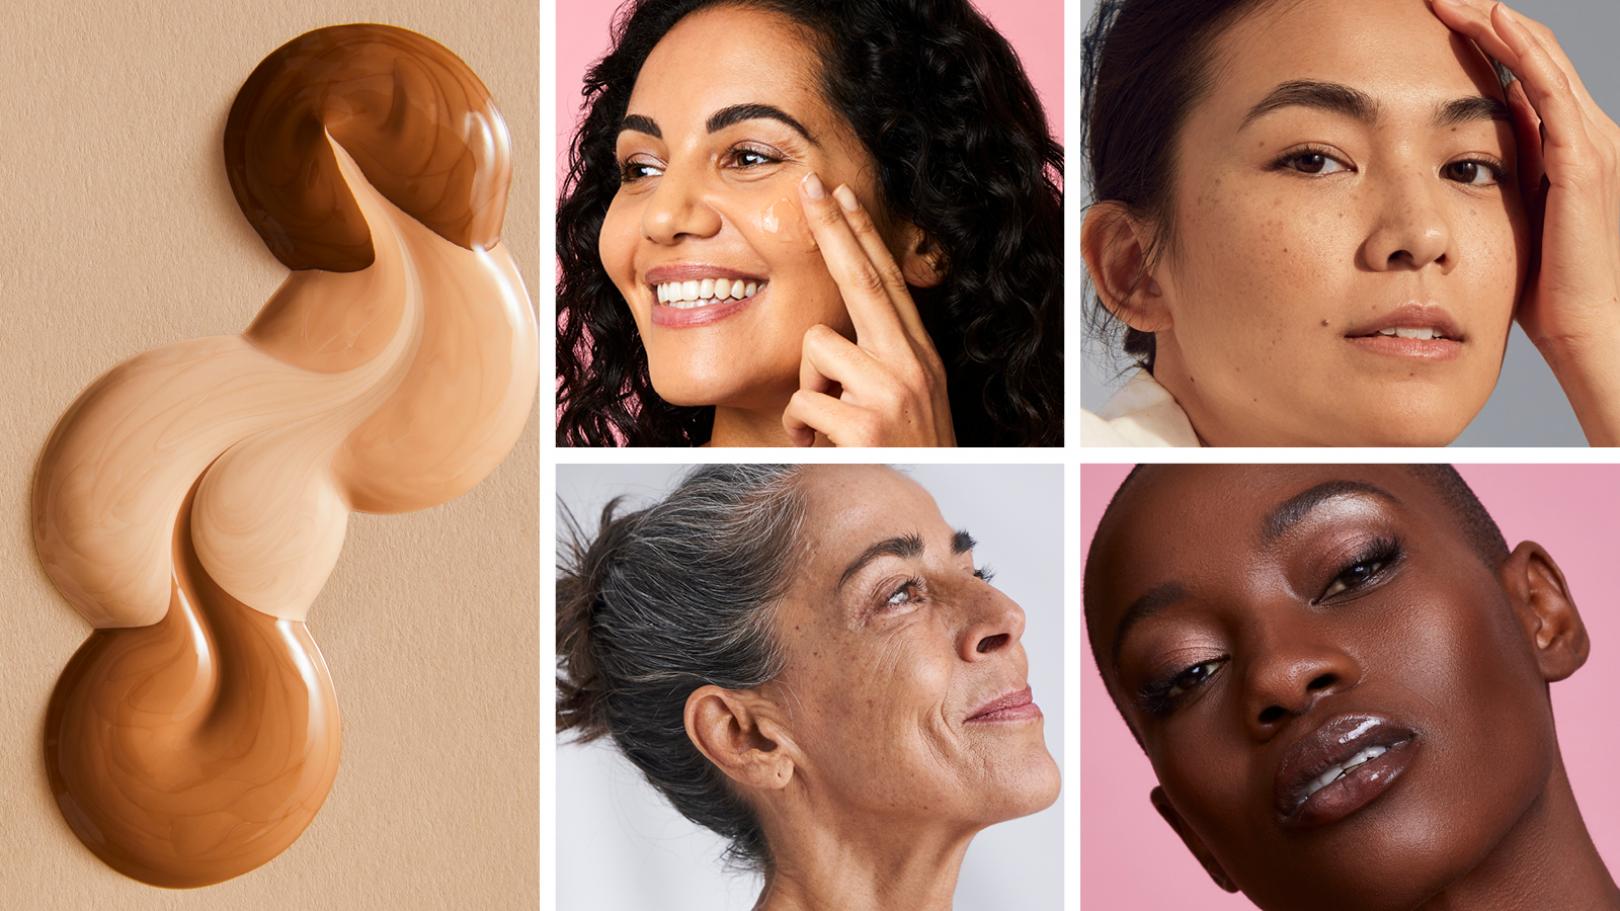 Collage of images of women with different skin colors